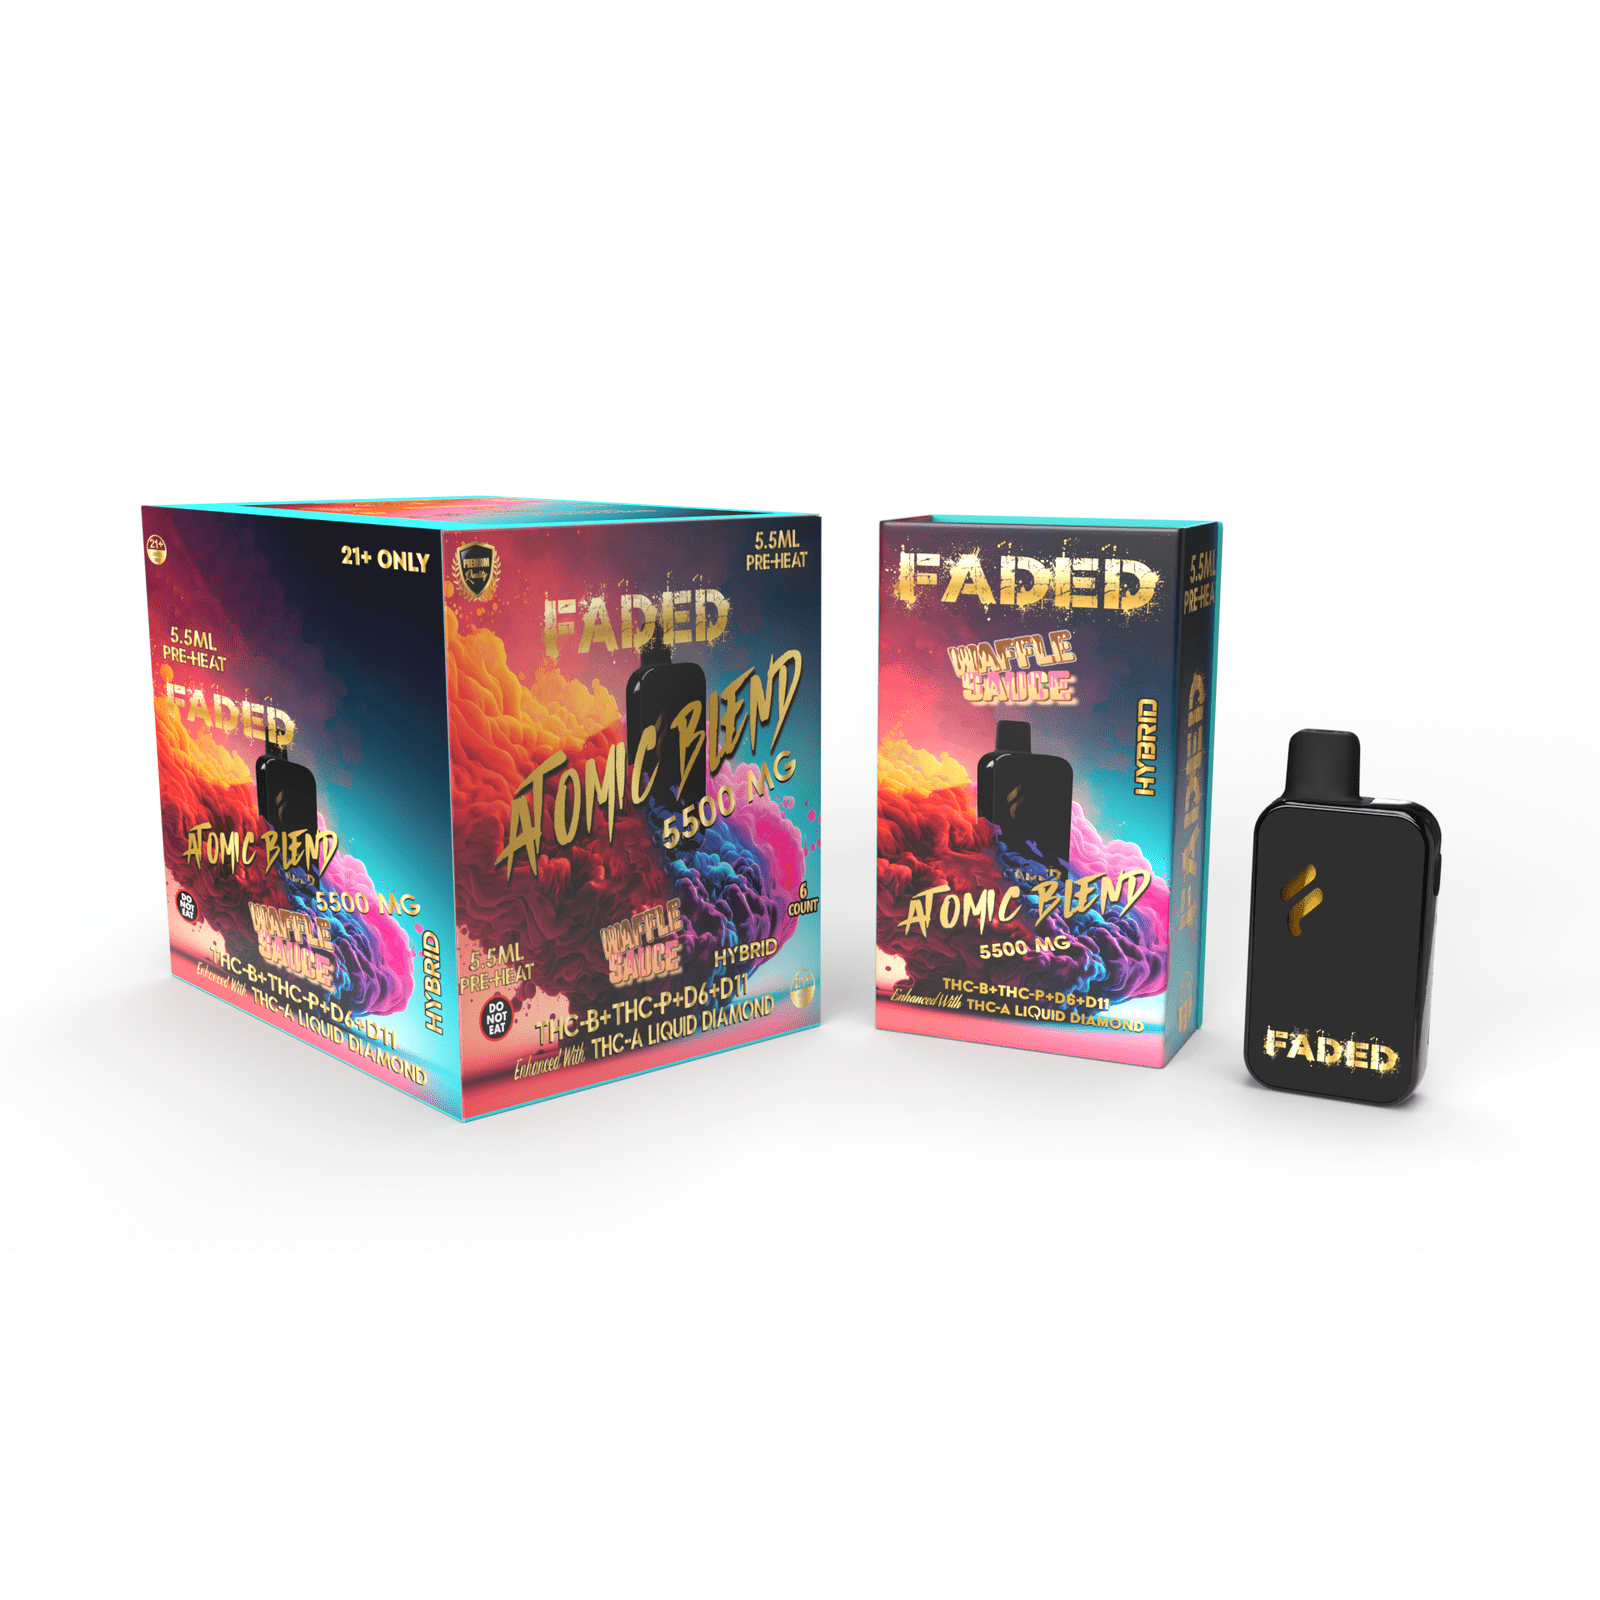 FADED THC-B+THC-P+D6+D11 ENHANCED WITH THC-A LIQUID DIAMOND RECHARGEABLE DISPOSABLE - HYBRID WAFFLE SAUCE 5.5ML